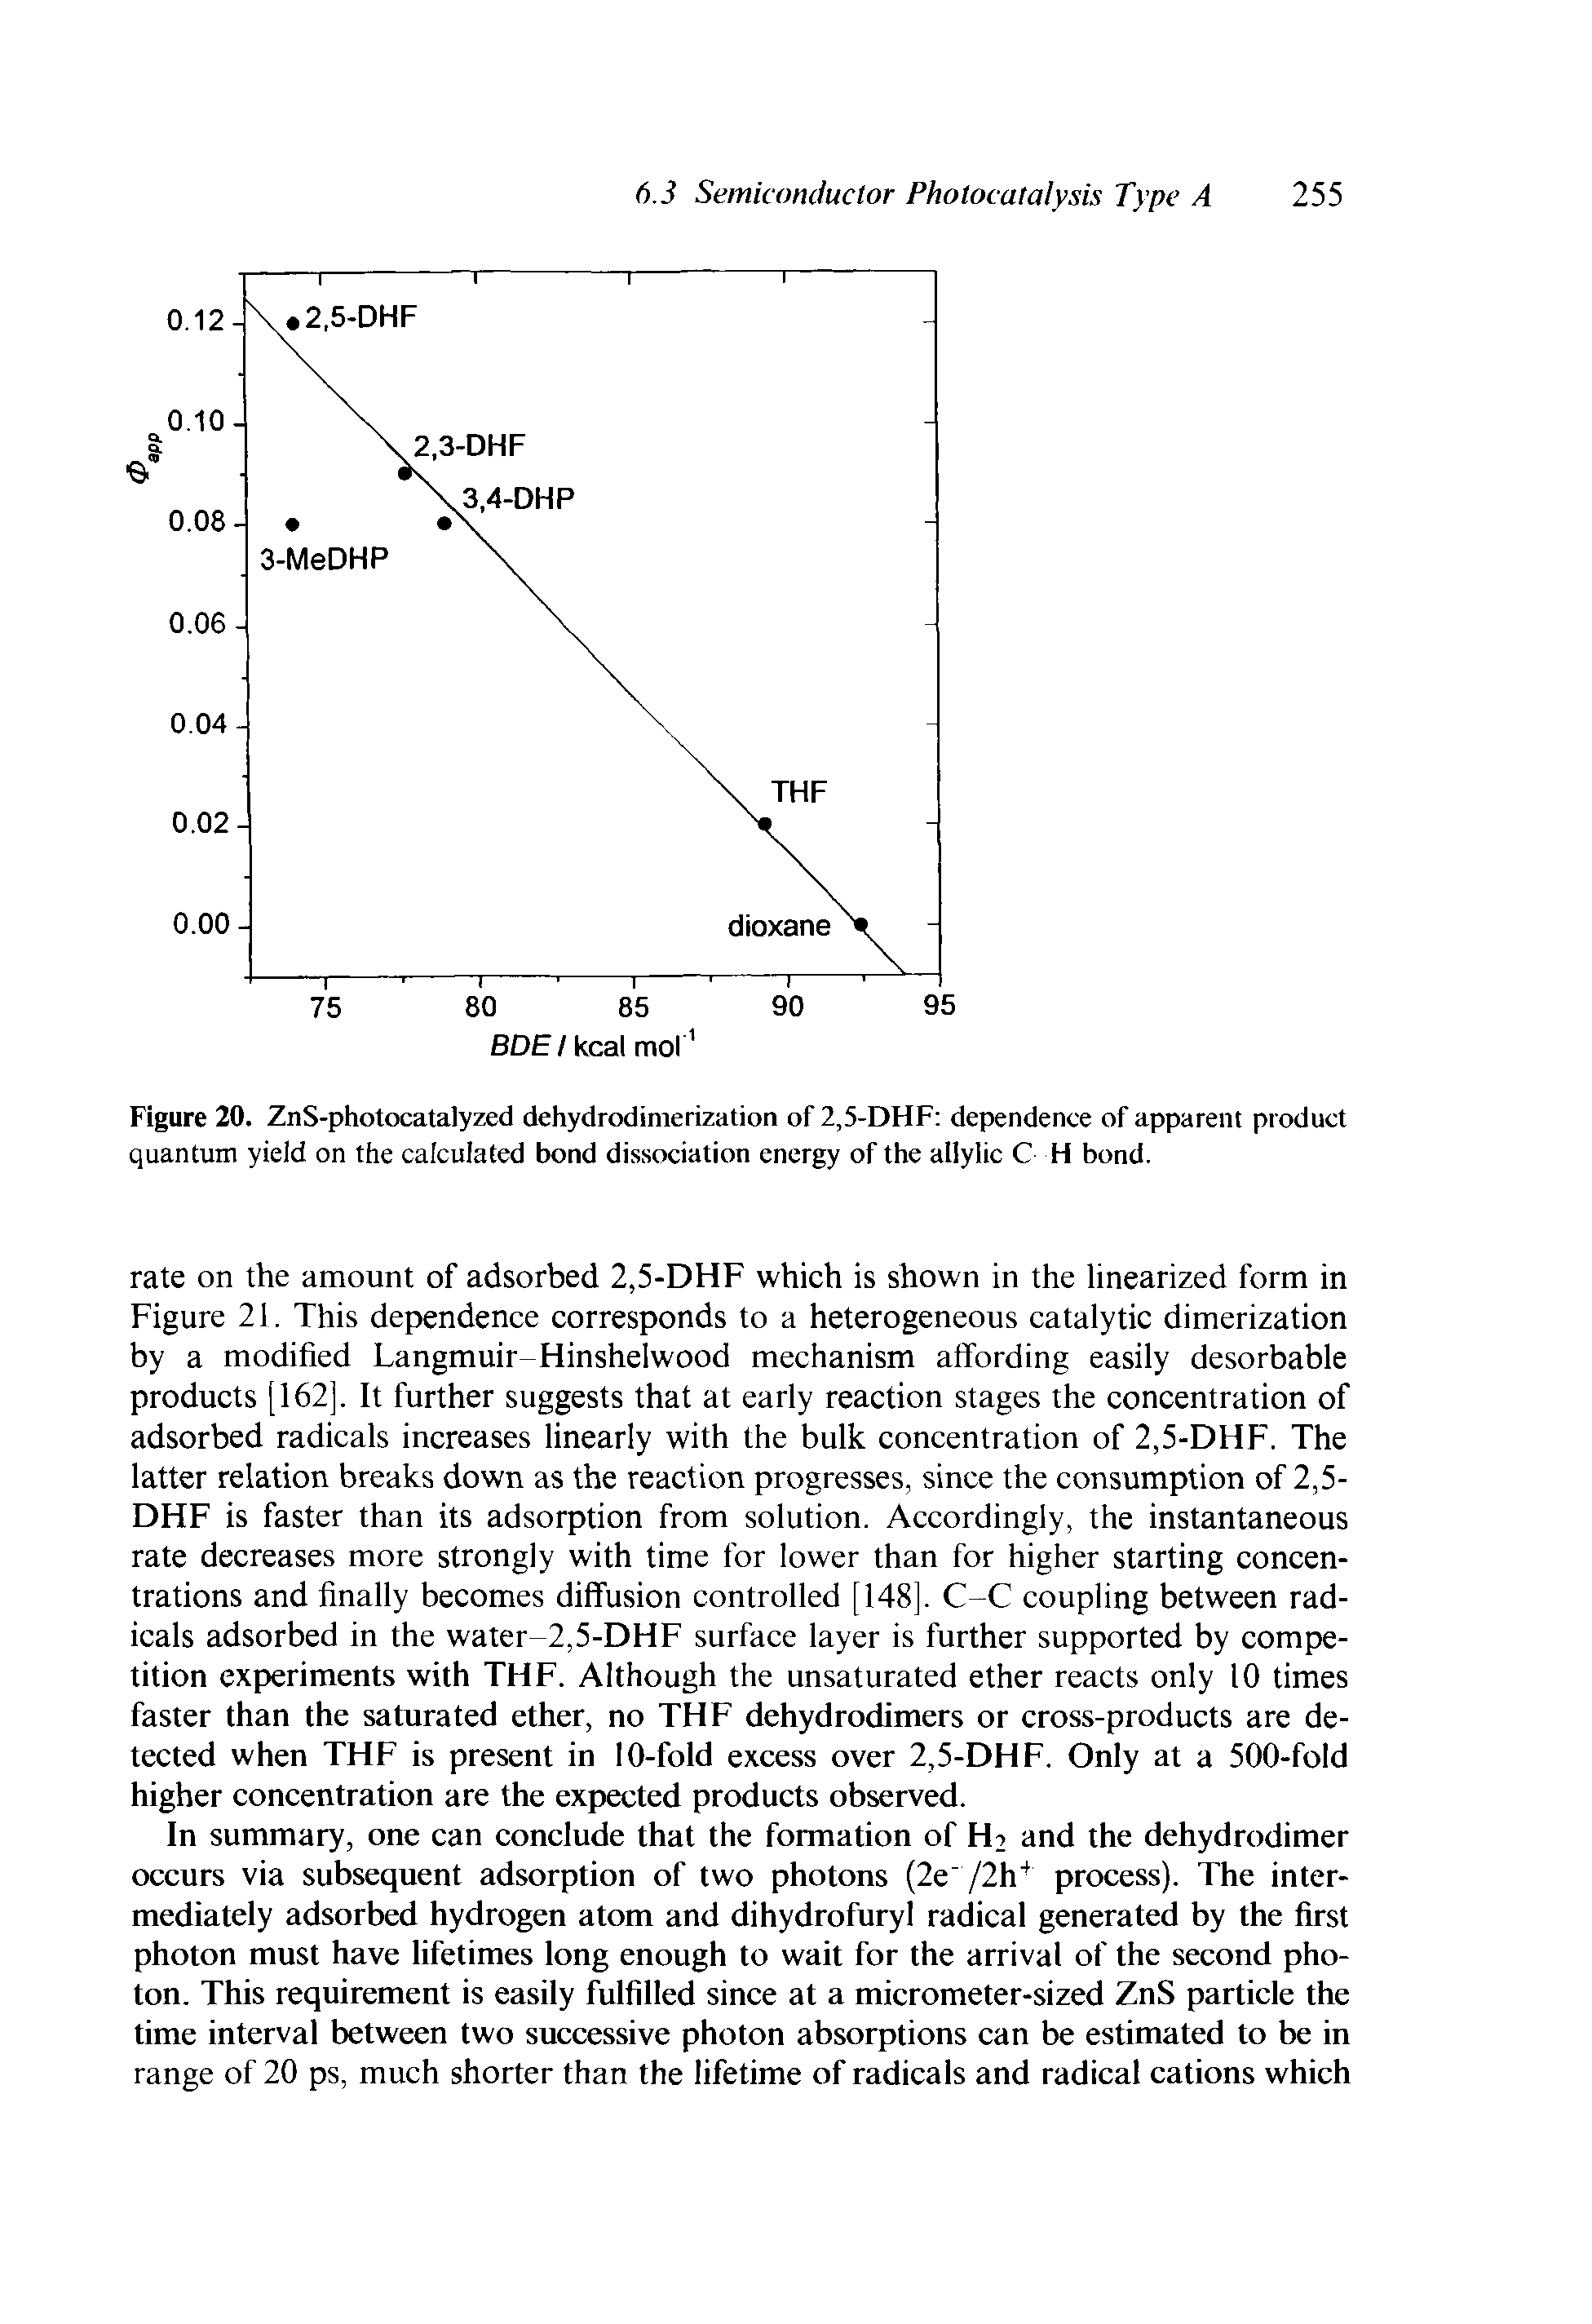 Figure 20. ZnS-photocatalyzed dehydrodinierization of 2,5-DHF dependence of apparent product quantum yield on the calculated bond dissociation energy of the allylic C H bond.